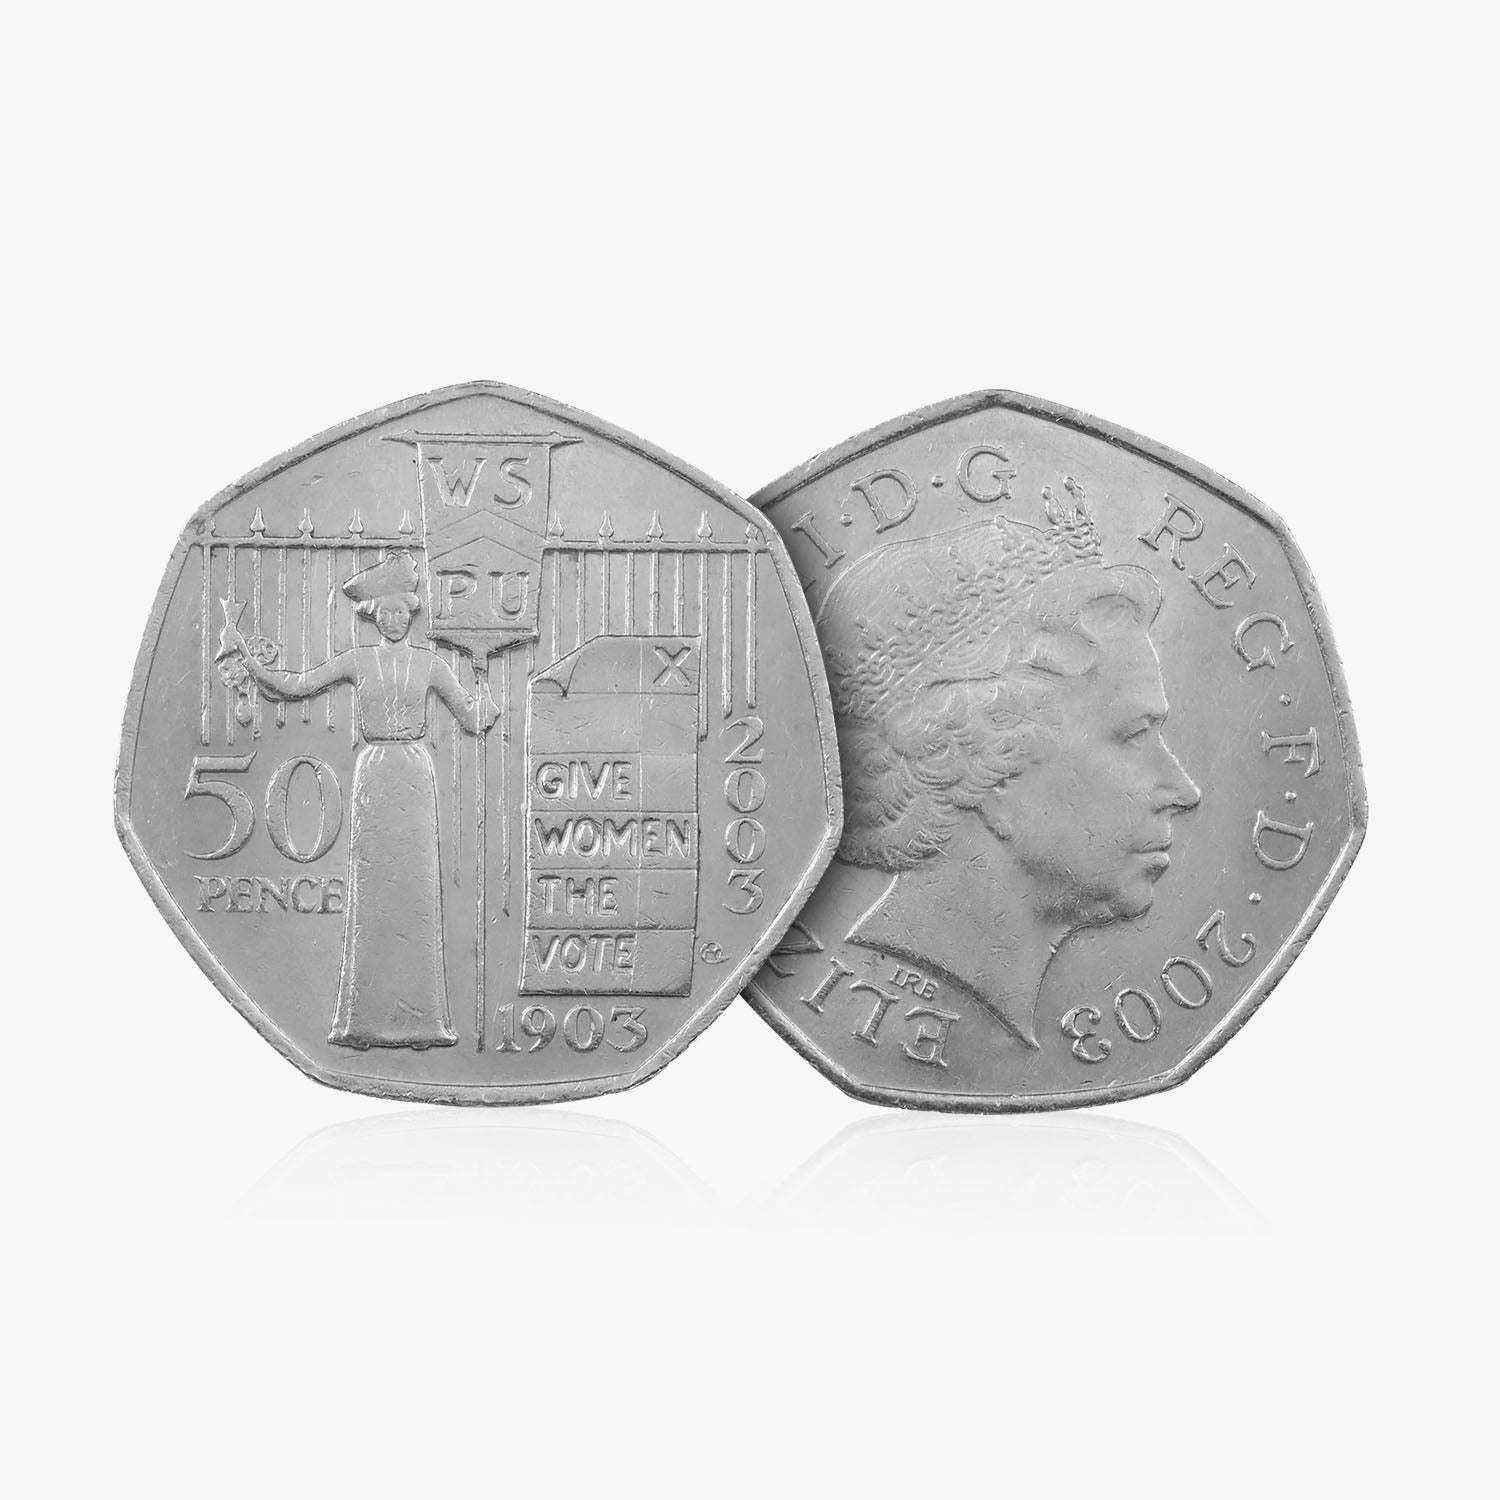 2003 Circulated Suffragettes 50p Coin